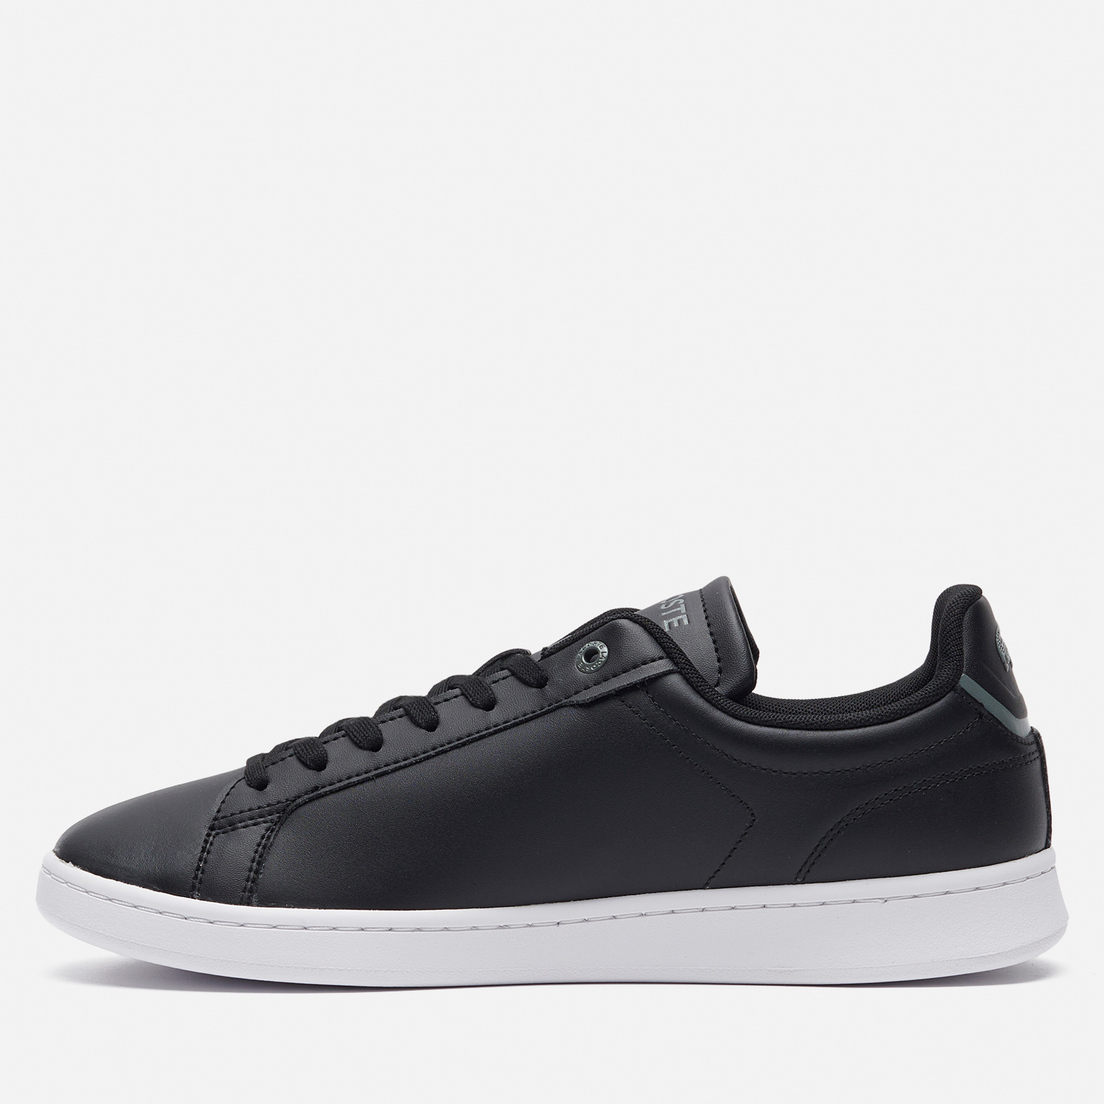 Lacoste Мужские кроссовки Carnaby Pro BL Leather Tonal